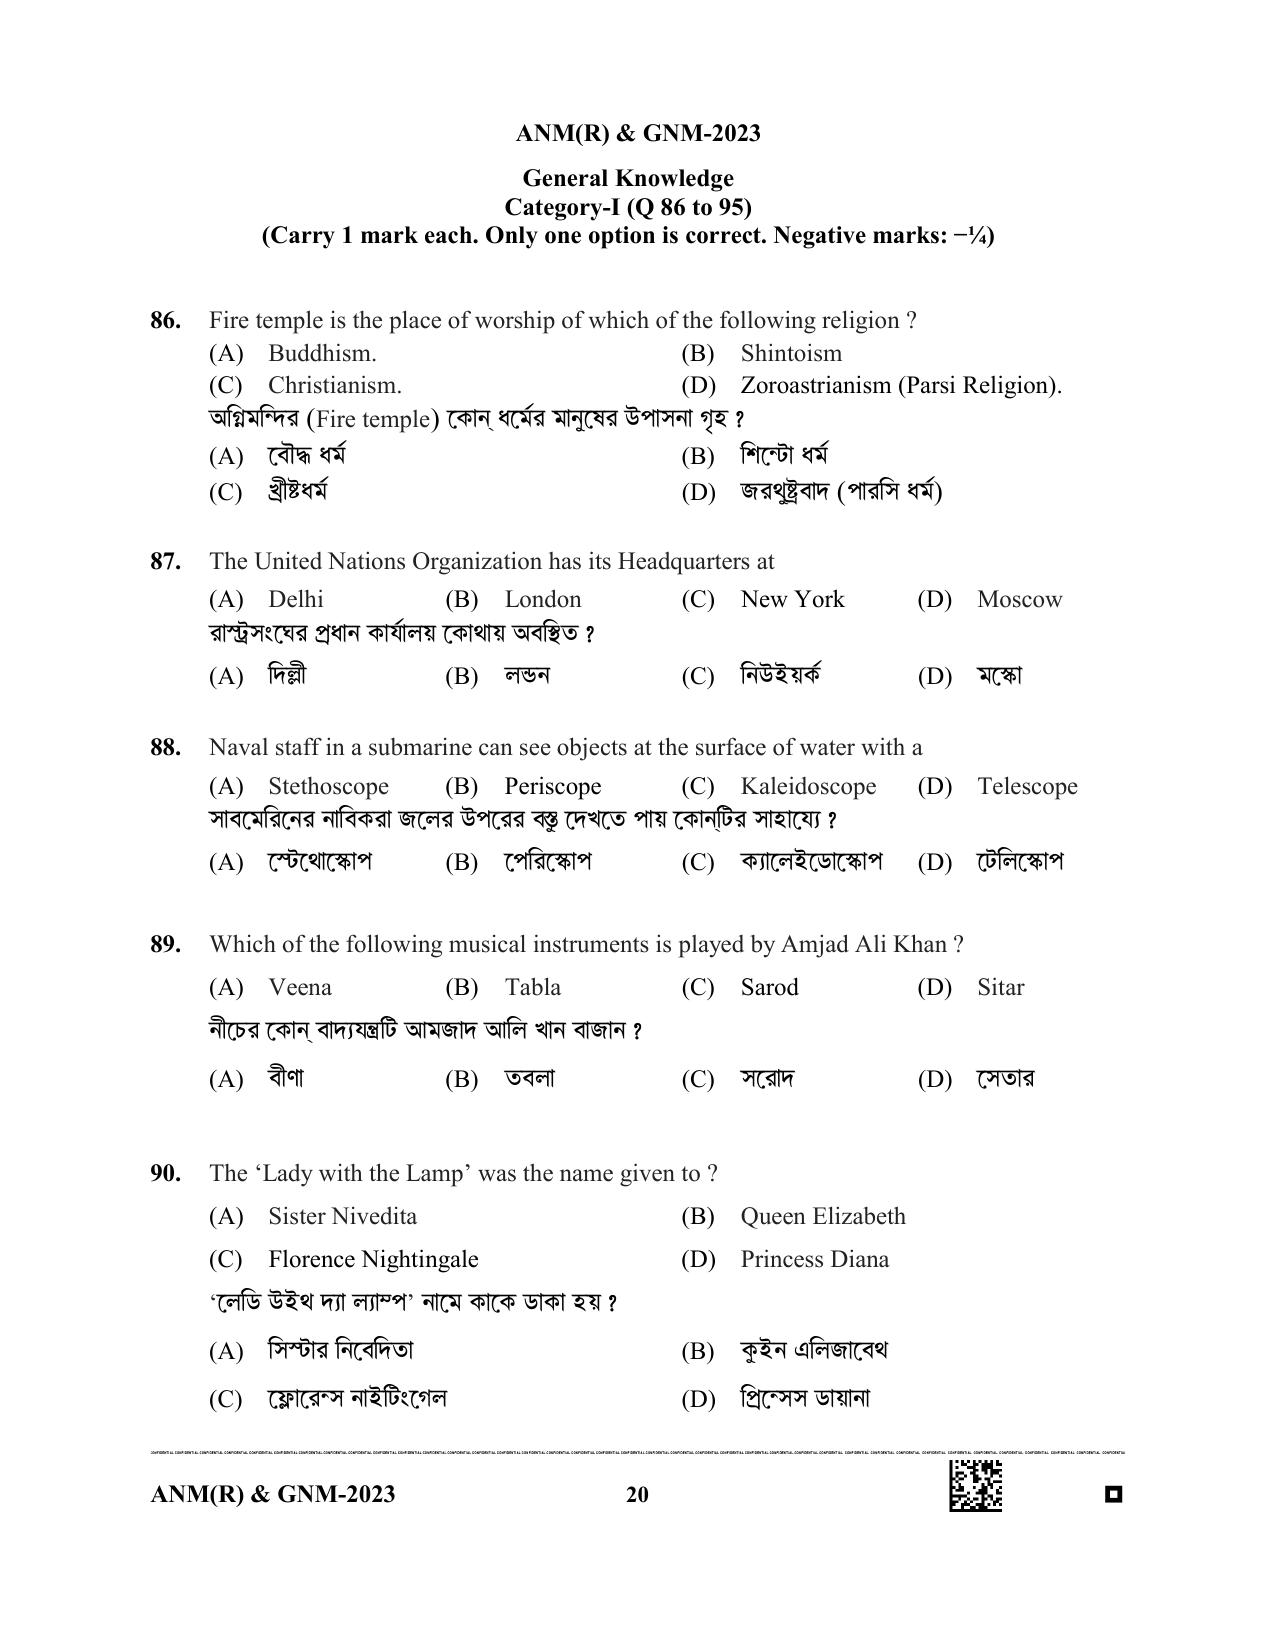 WB ANM GNM 2023 Question Paper - Page 20